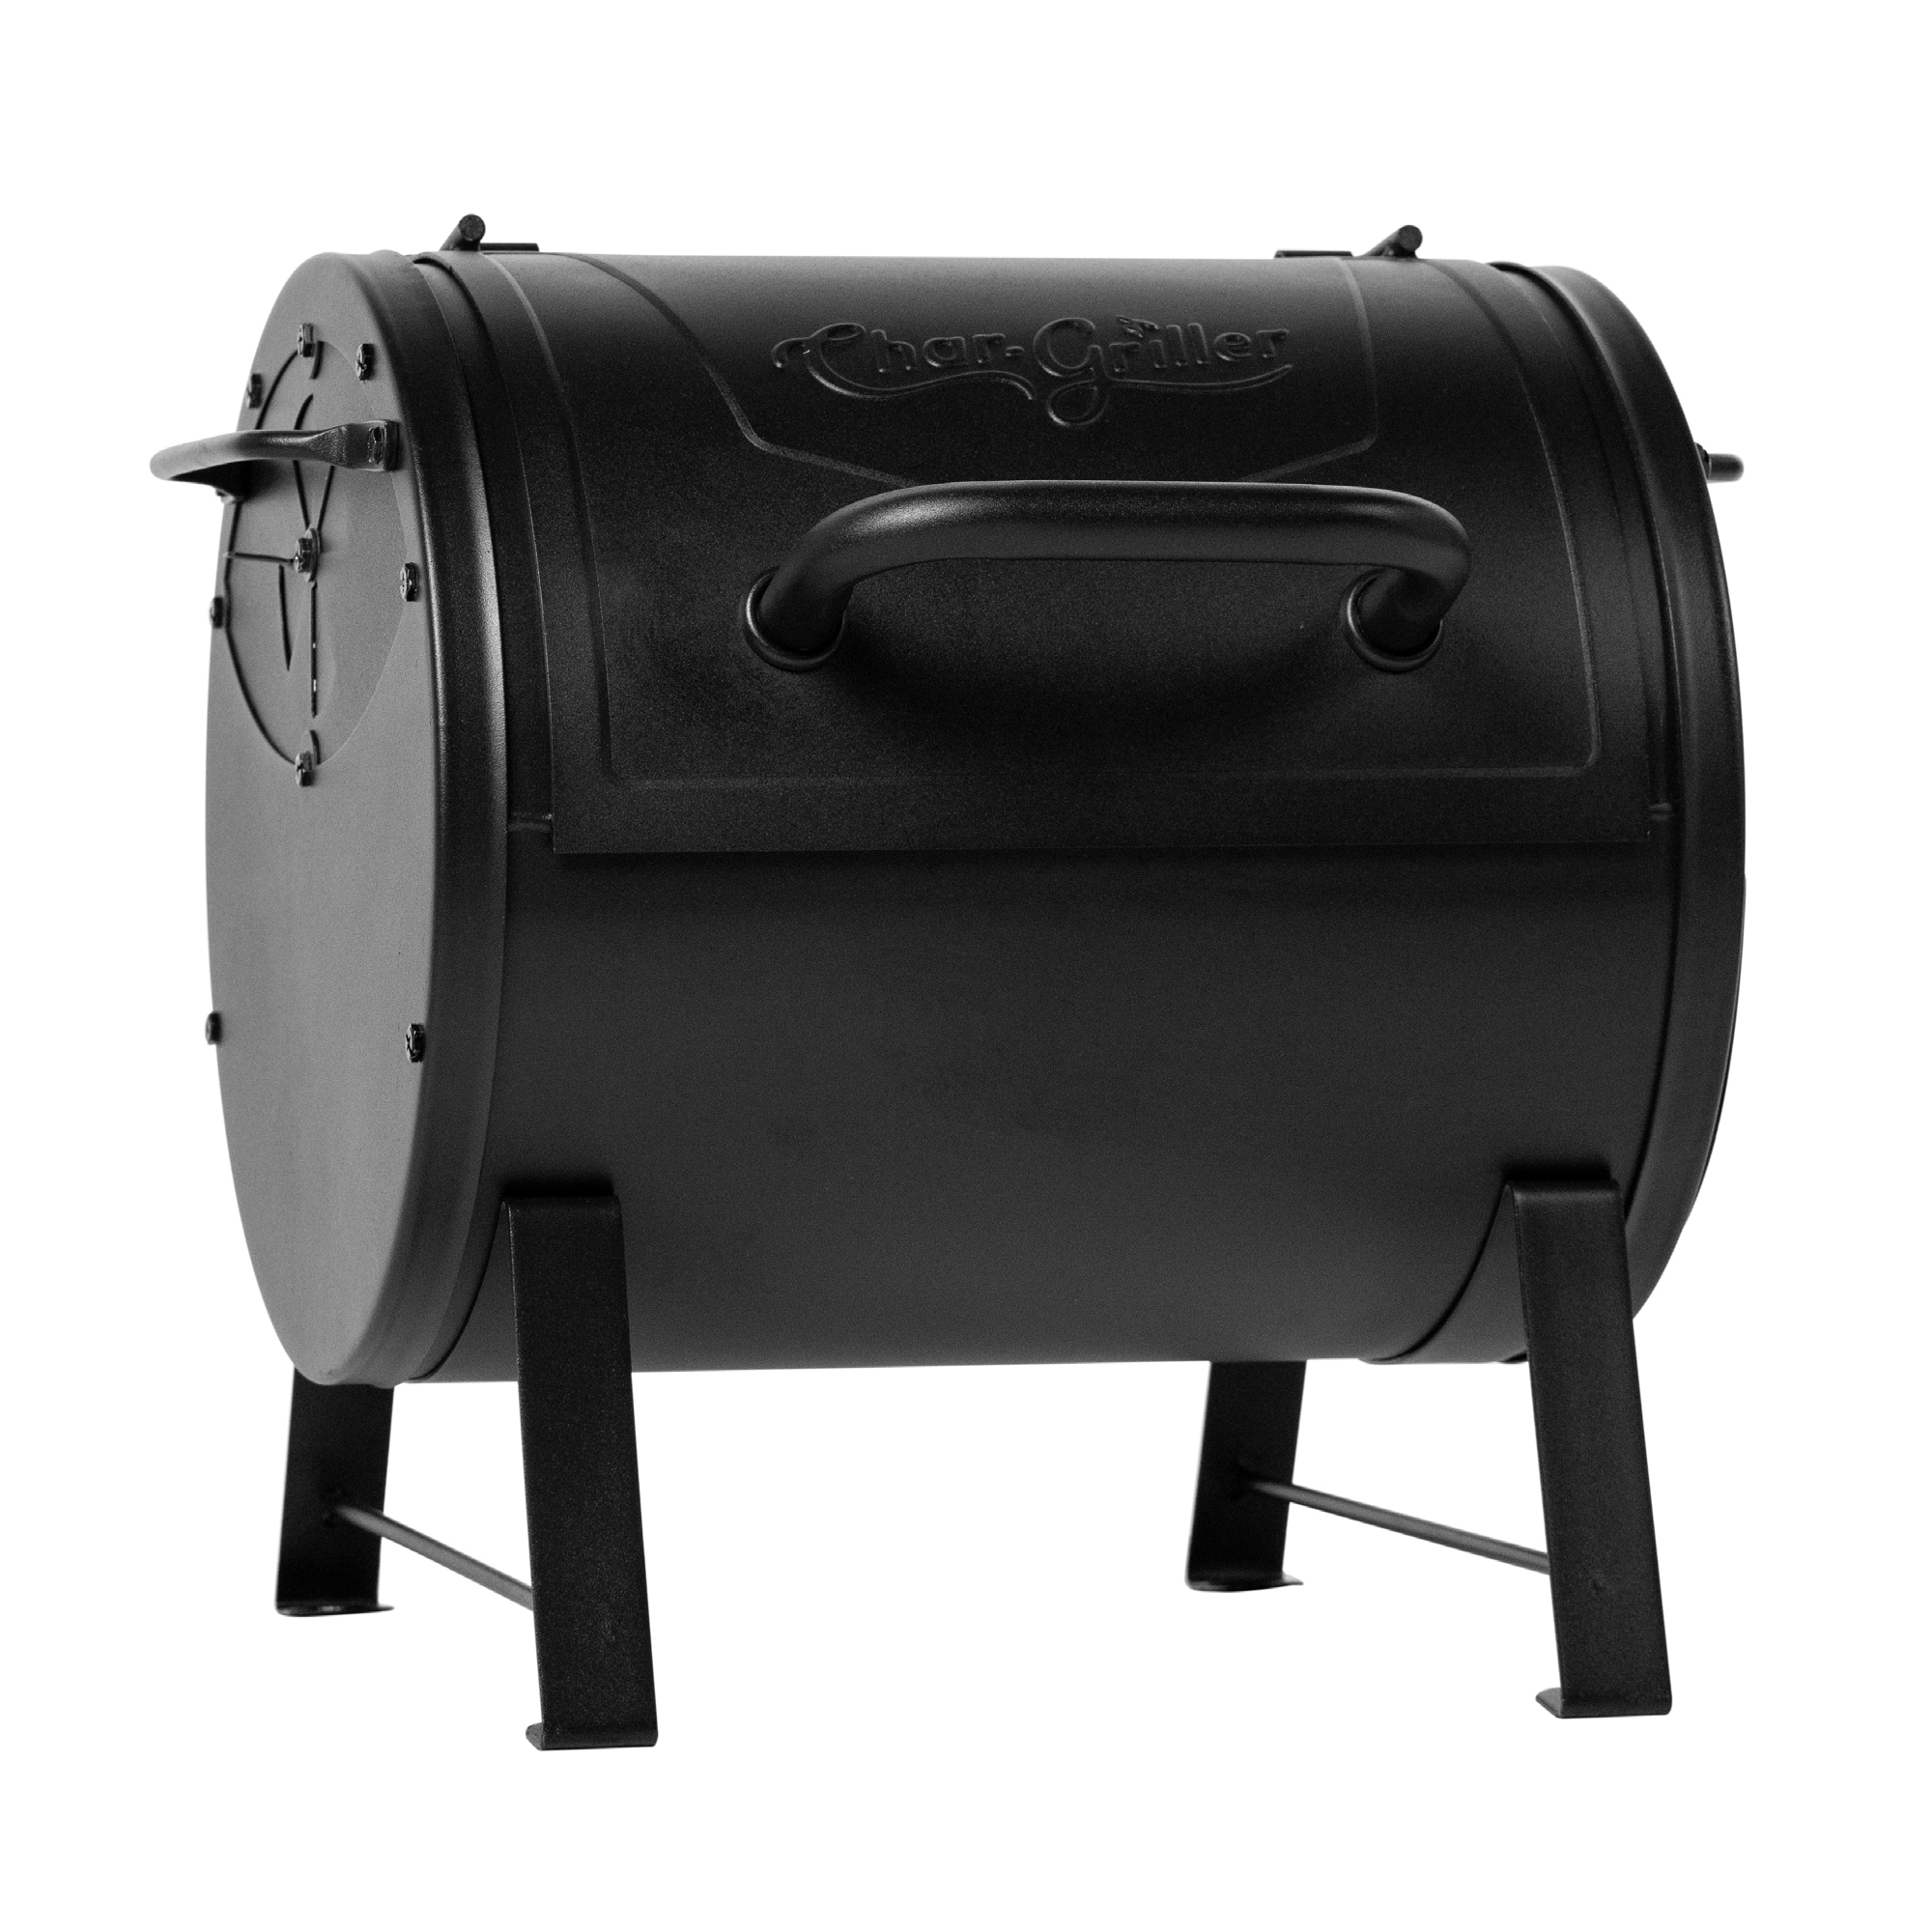 Portable Charcoal Grill and Side Fire Box Grills & Outdoor Cooking at